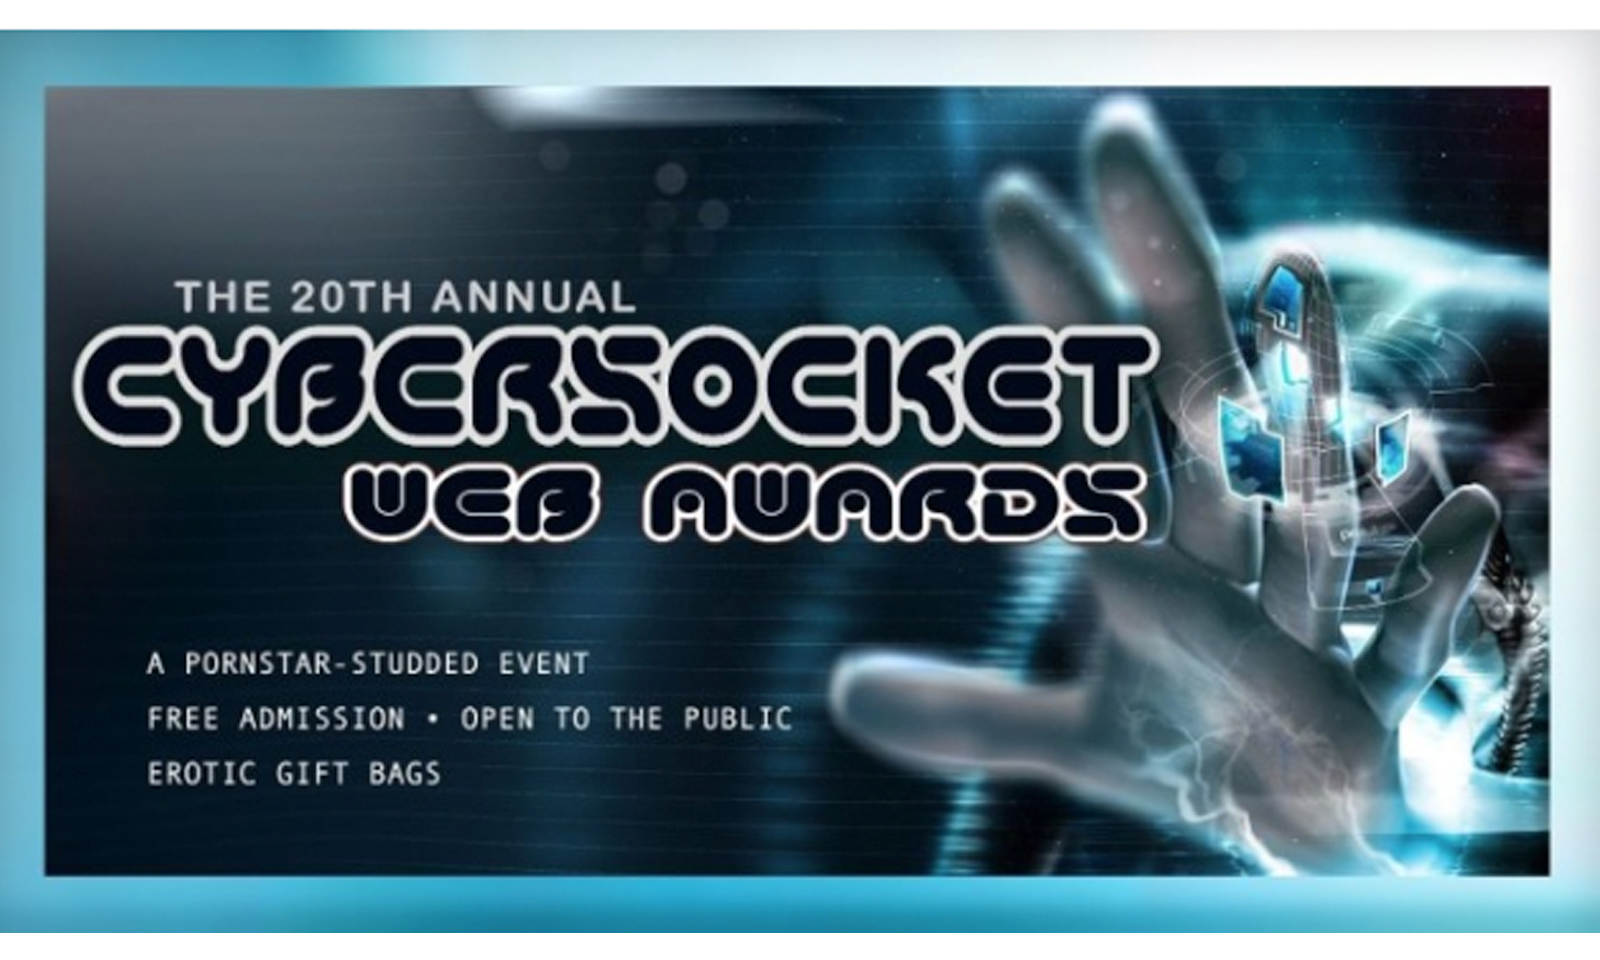 Aneros Earns Multiple 2020 Cybersocket Awards Noms